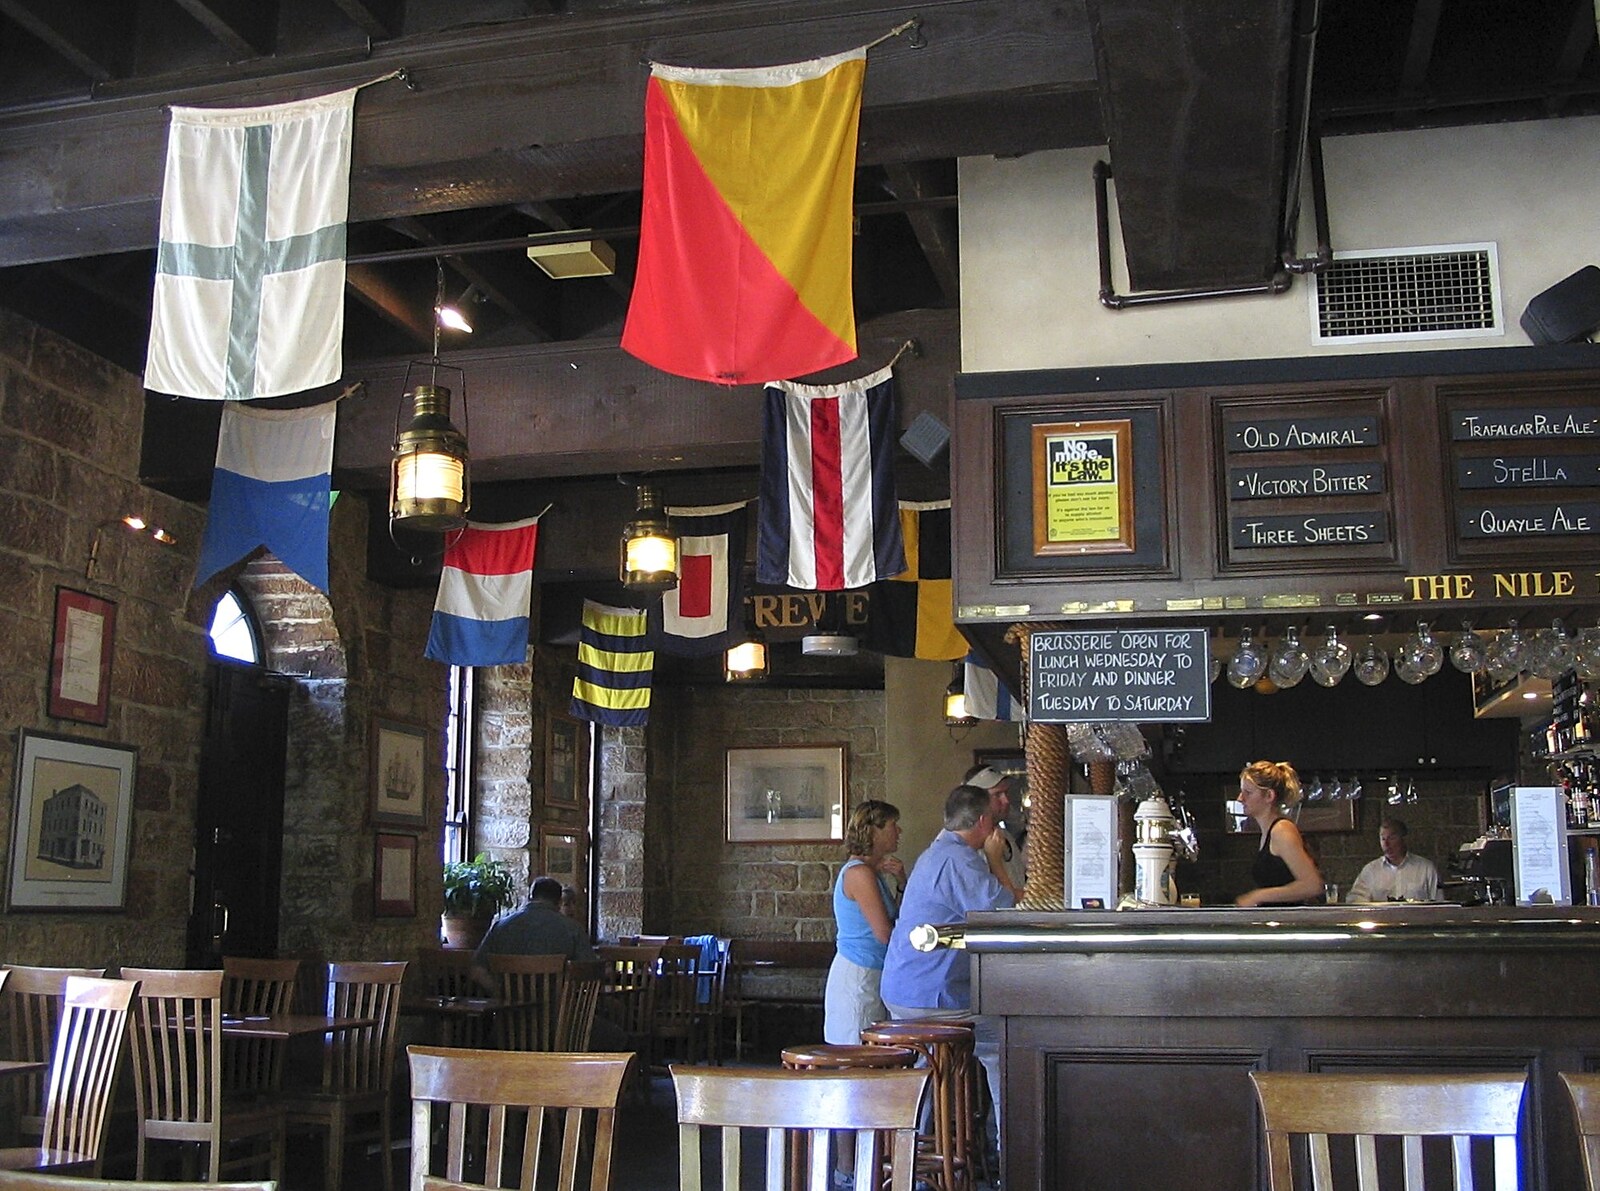 Inside the Lord Nelson hotel/brewery from Sydney, New South Wales, Australia - 10th October 2004